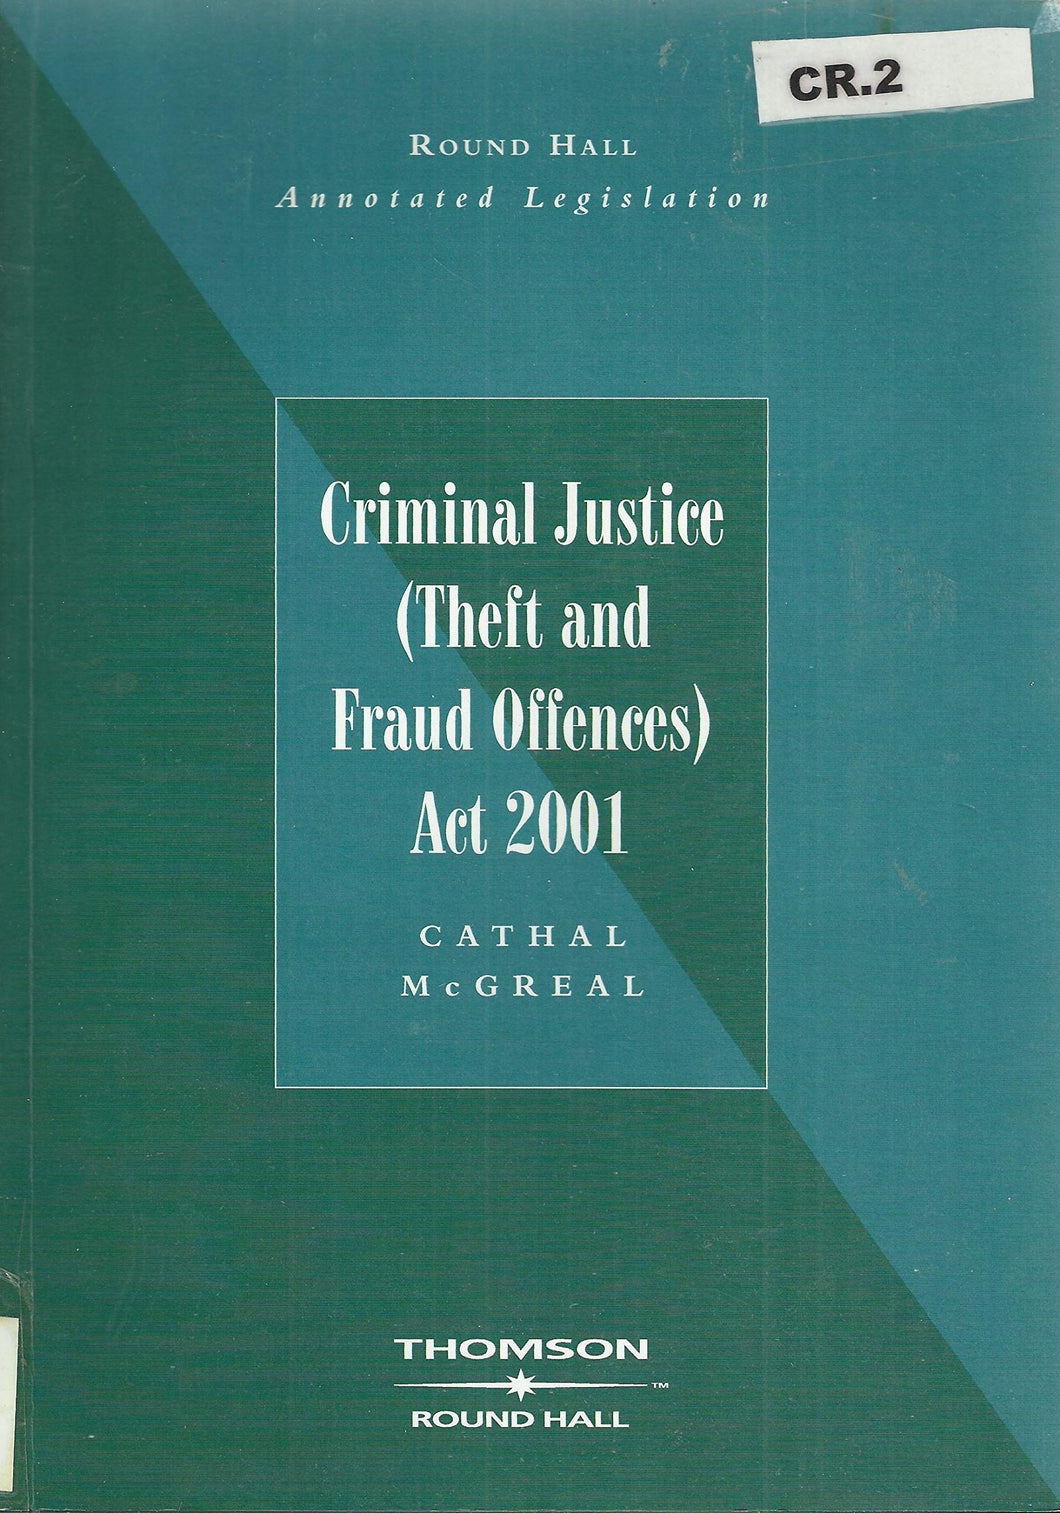 Criminal Justice (Theft and Fraud Offences) Act 2001 2001: Offprint from the Irish Current Law Statutes Annotated